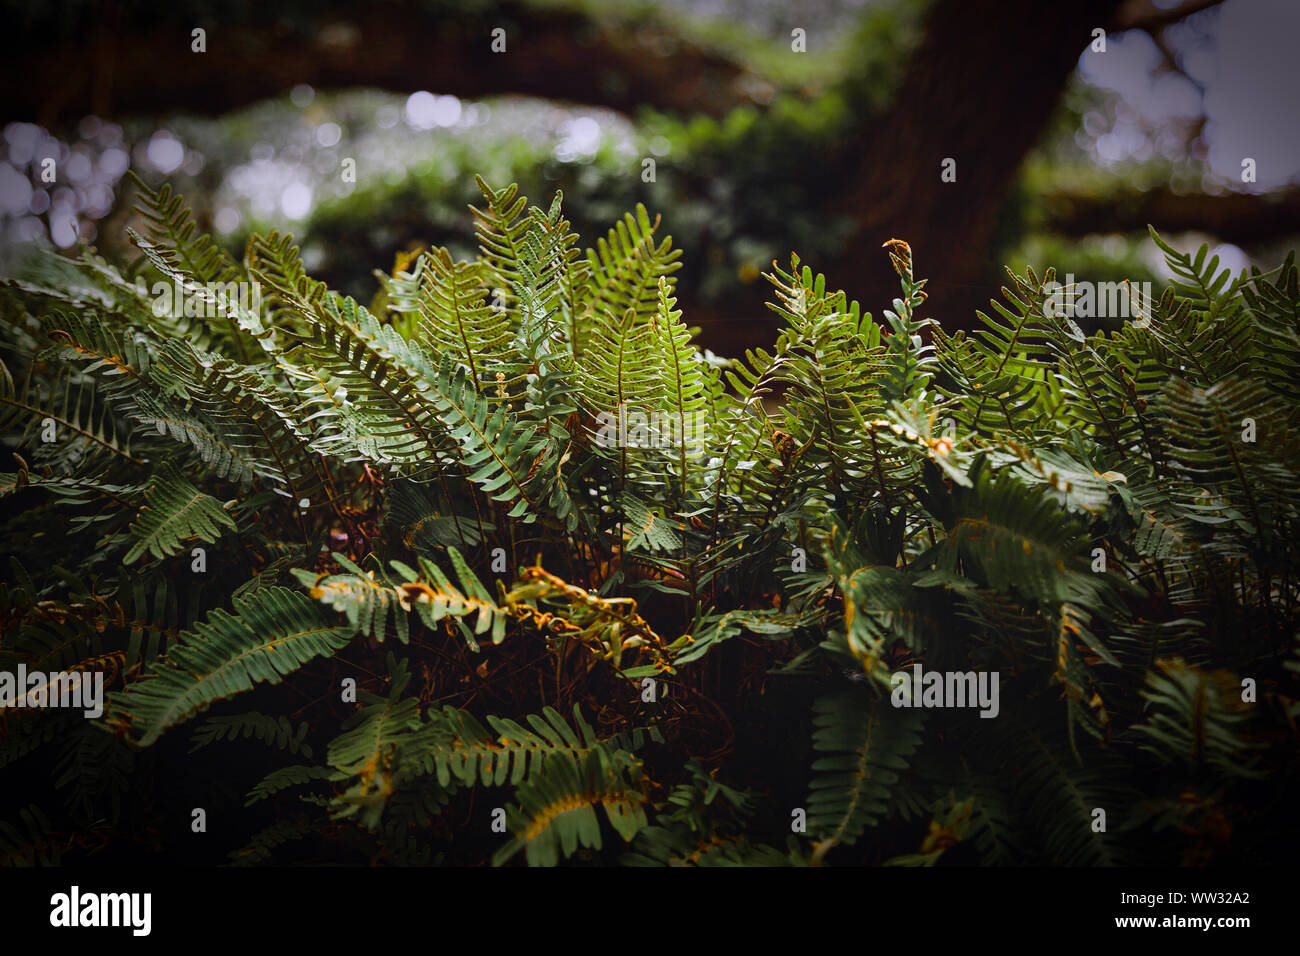 Ferns growing on a tree in a state park near Hudson, Florida Stock Photo